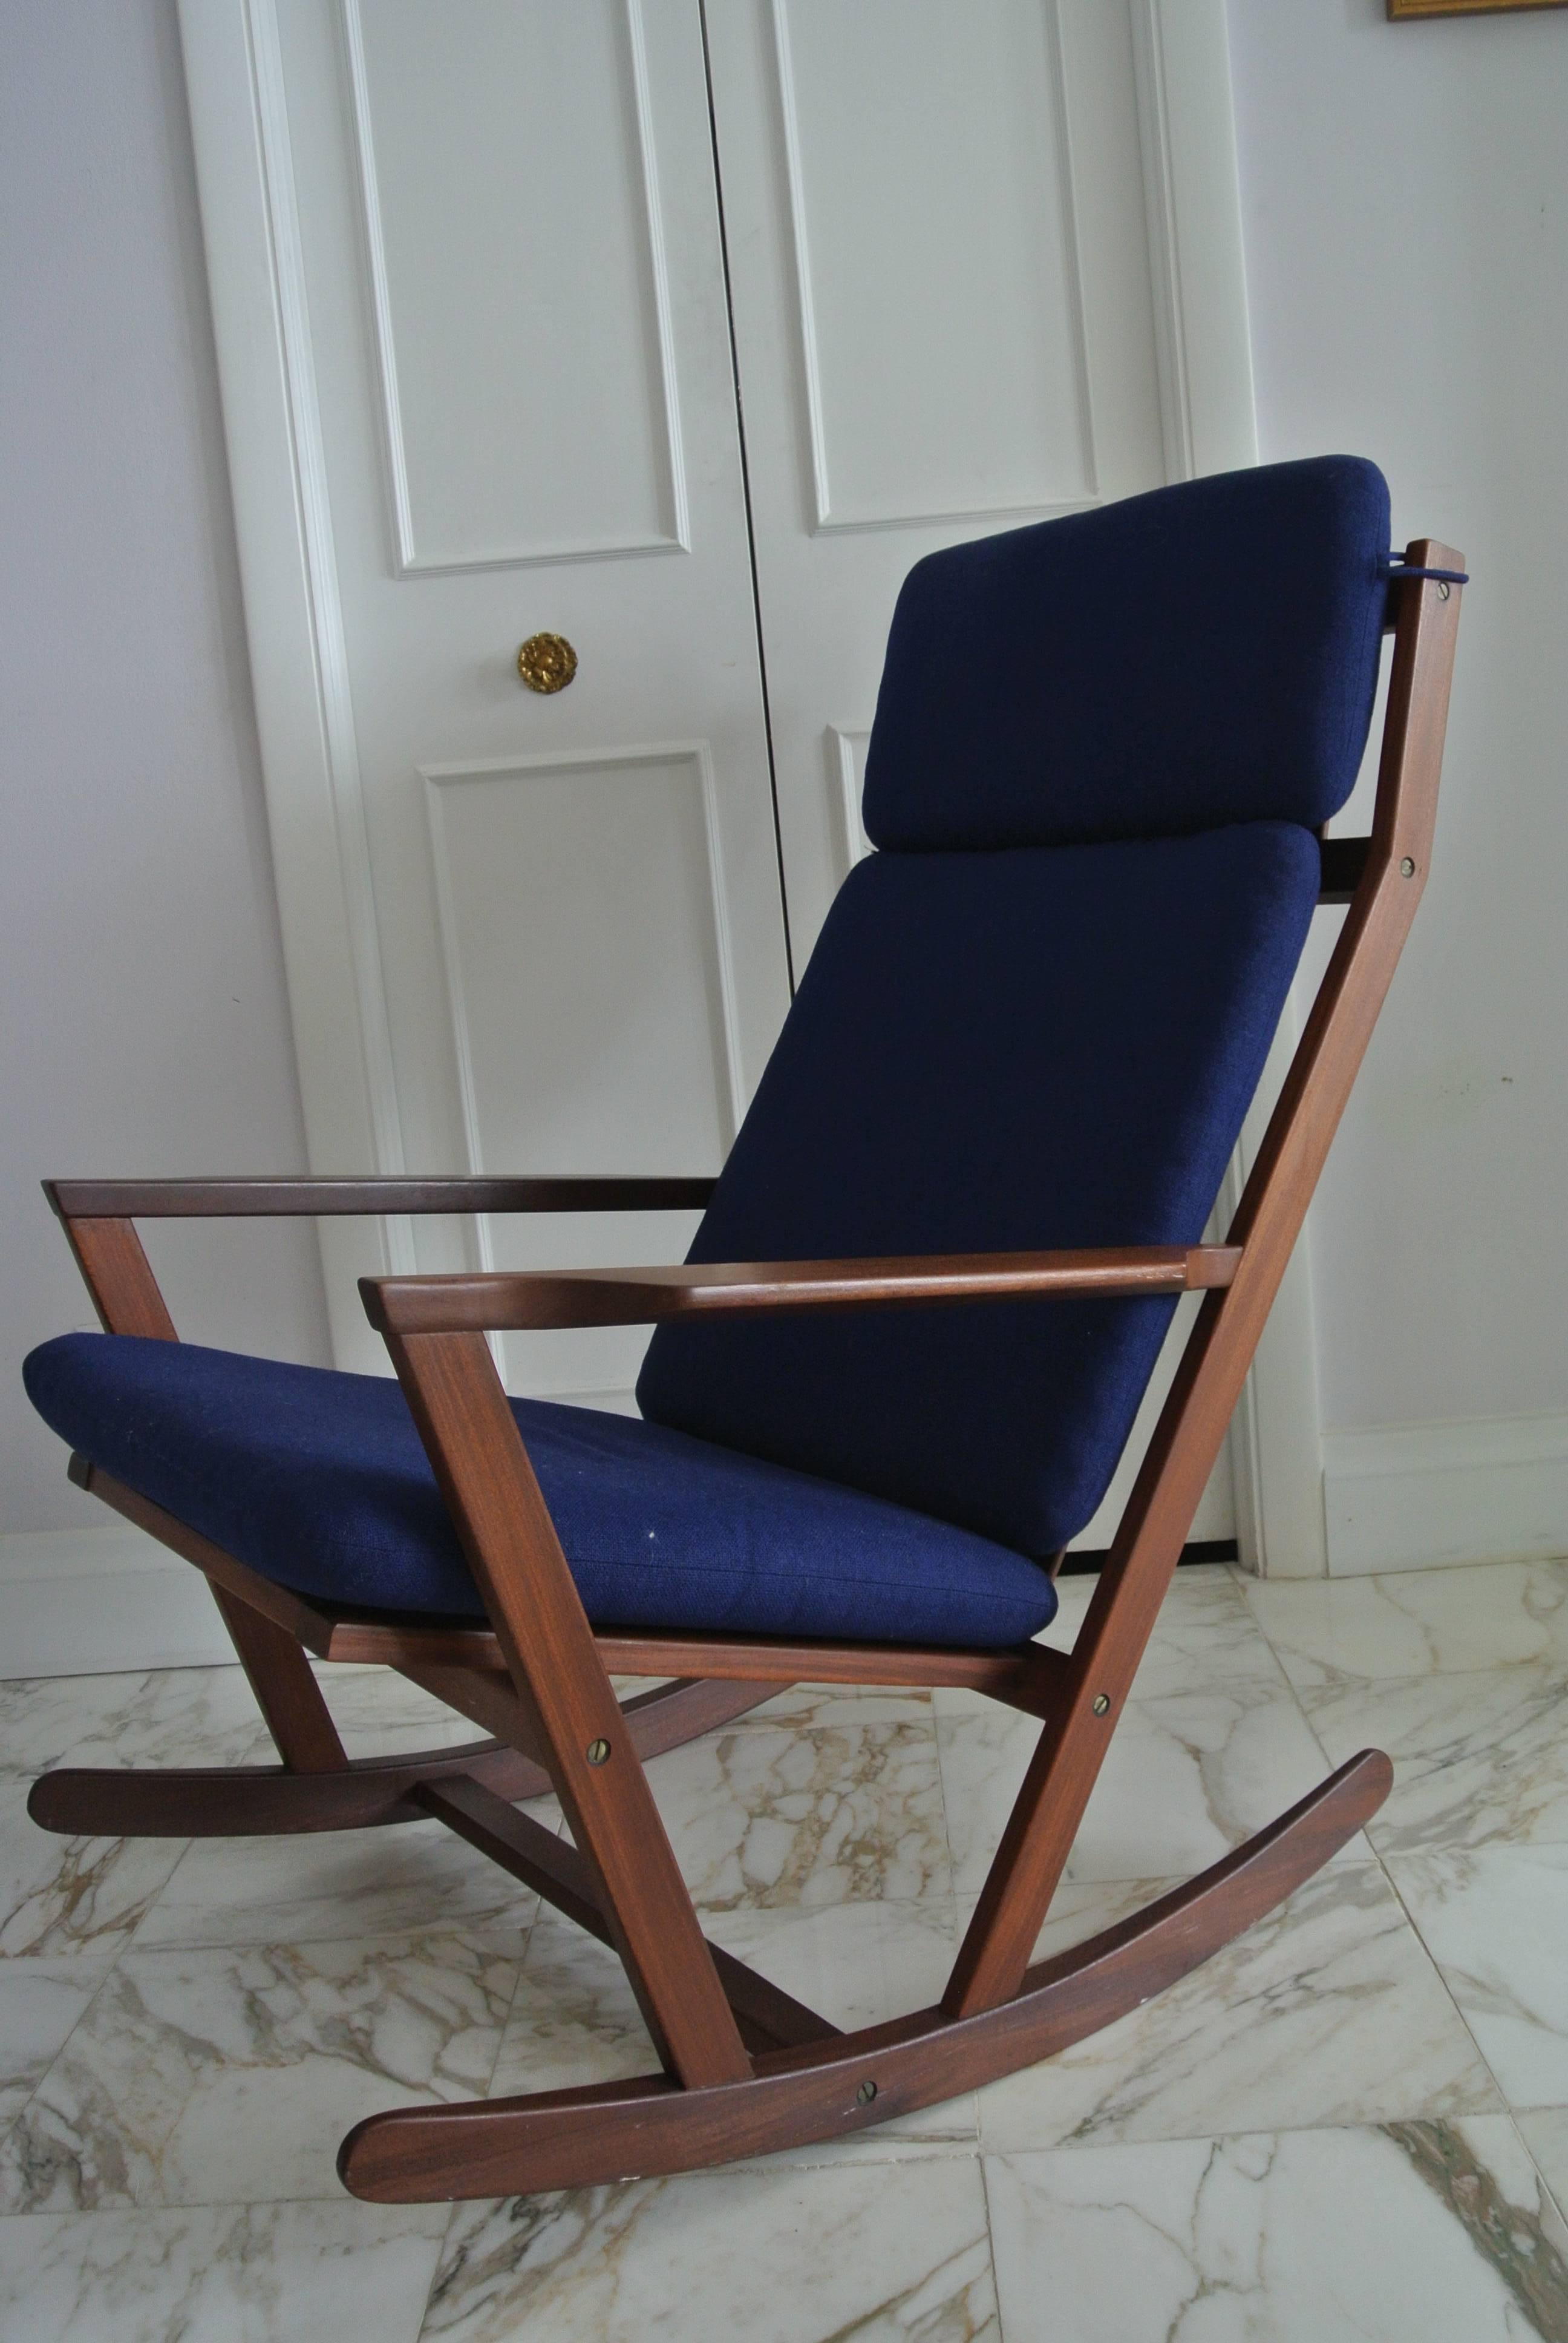 Beautiful teak rocking chair by Poul Volther for Frem Rojle. Original Naugahyde upholstered cushion.